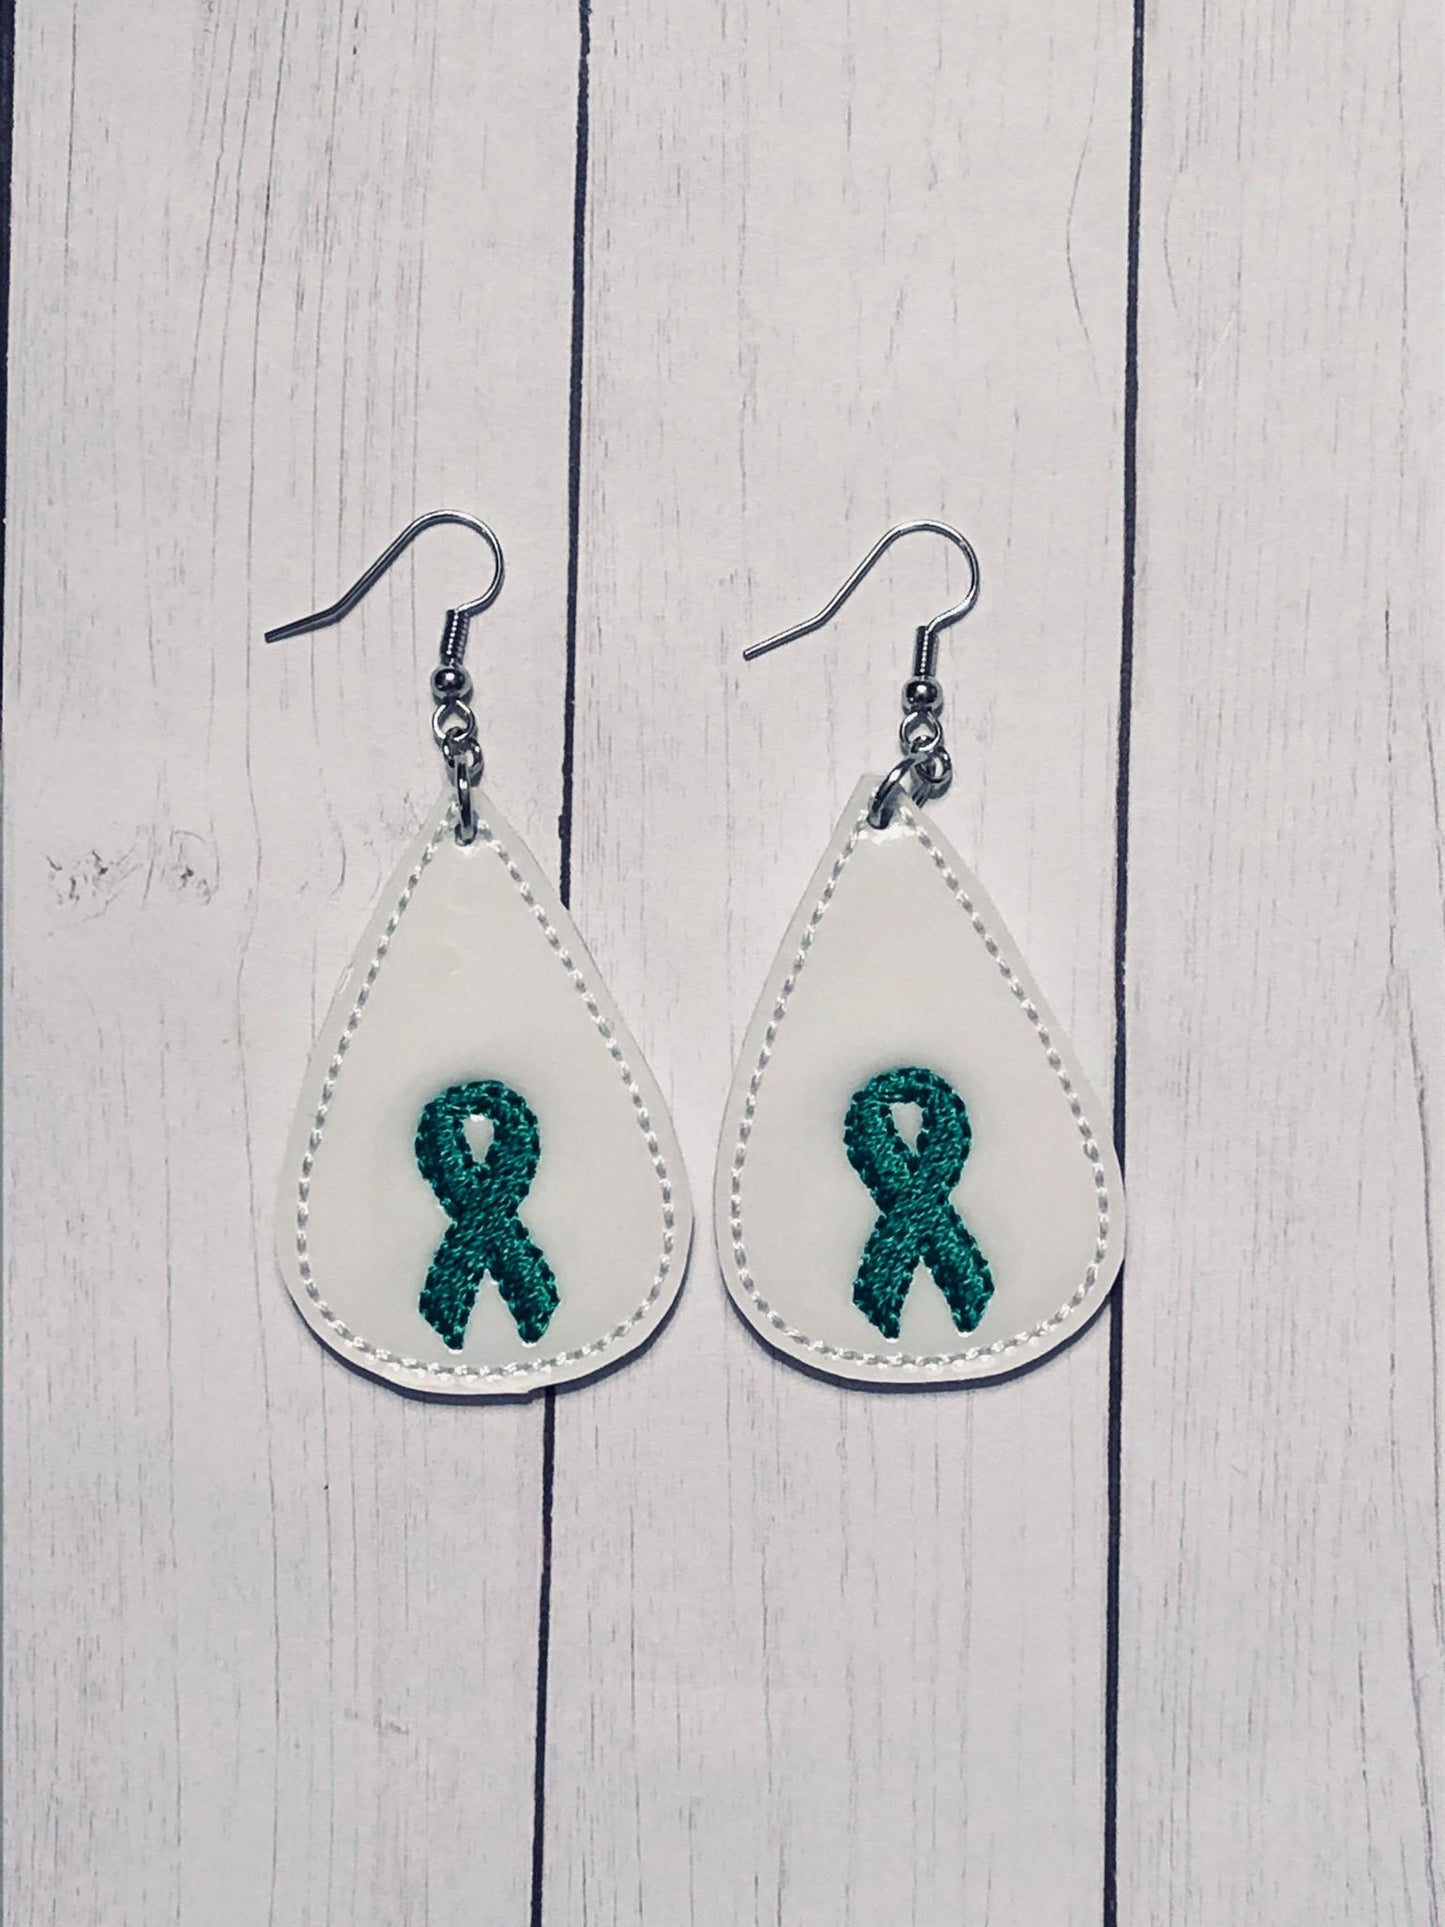 Awareness Ribbon Tear Drop Earrings - 3 sizes - 4x4 and 5x7 Grouped- Digital Embroidery Design